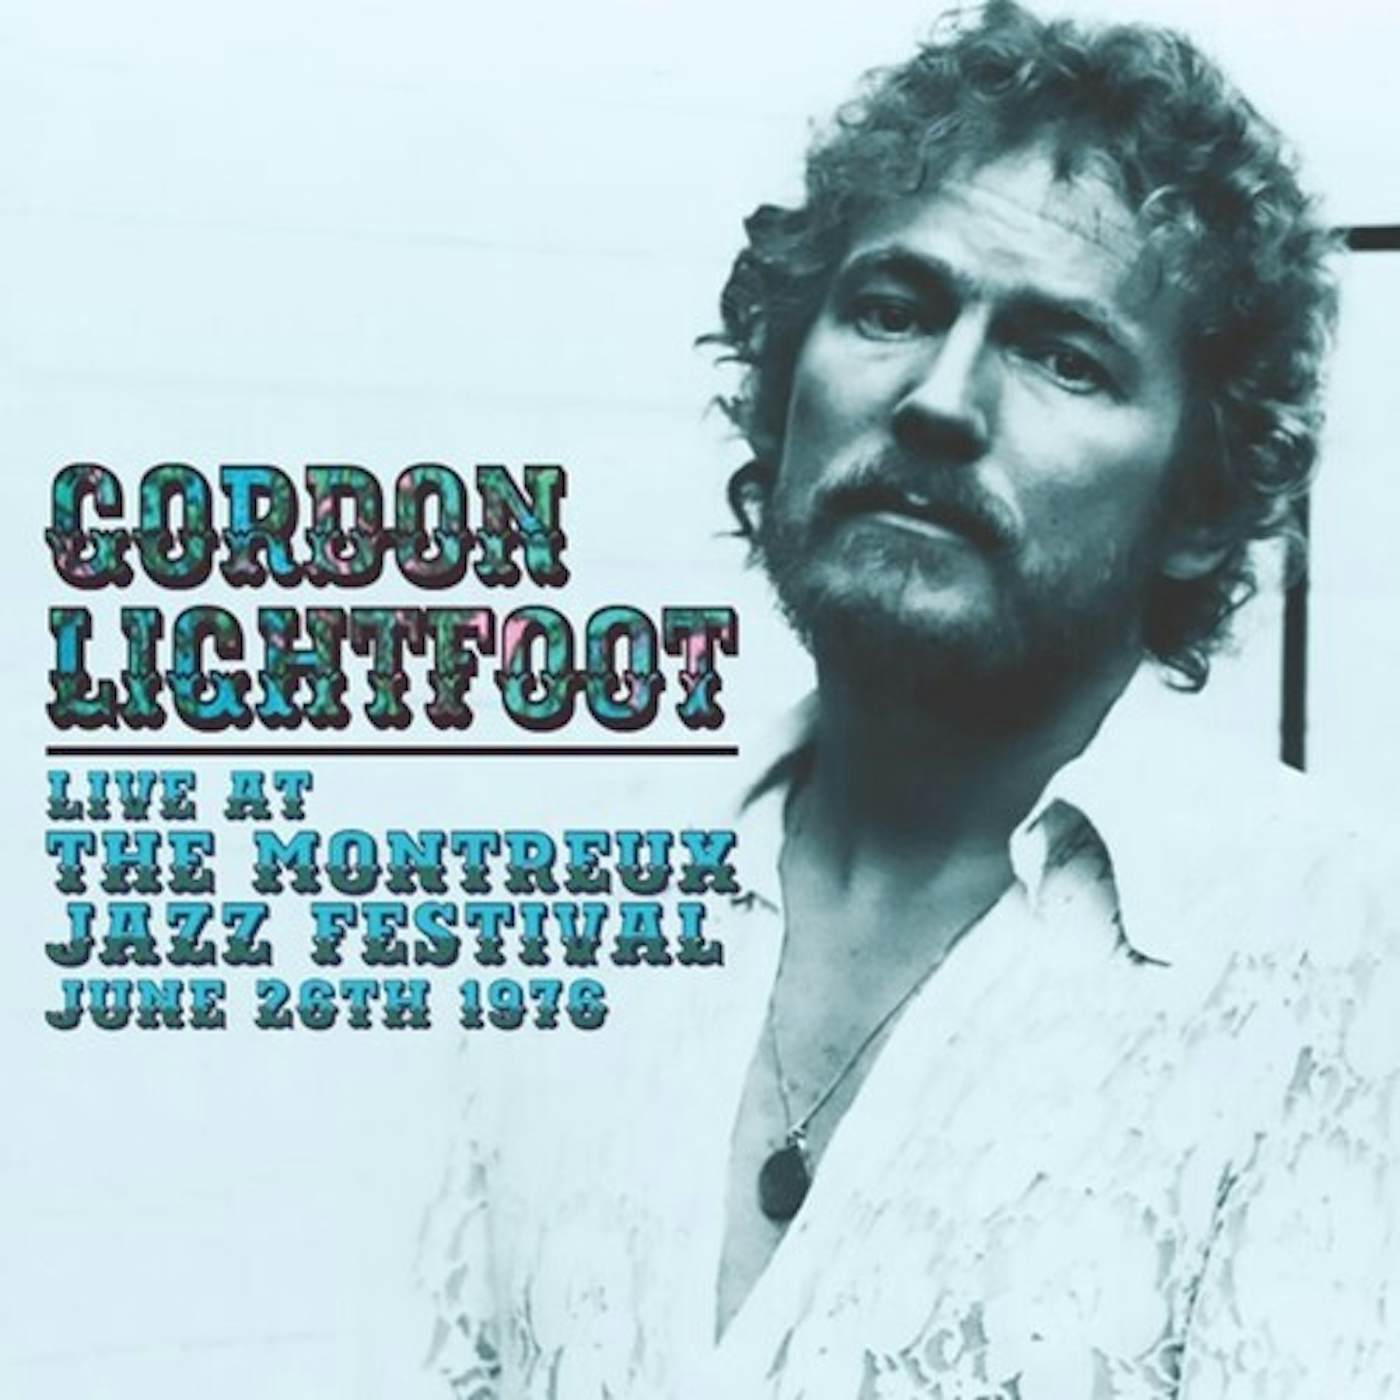 Gordon Lightfoot LIVE AT THE MONTREUX JAZZ FESTIVAL JUNE 26TH 1976 CD